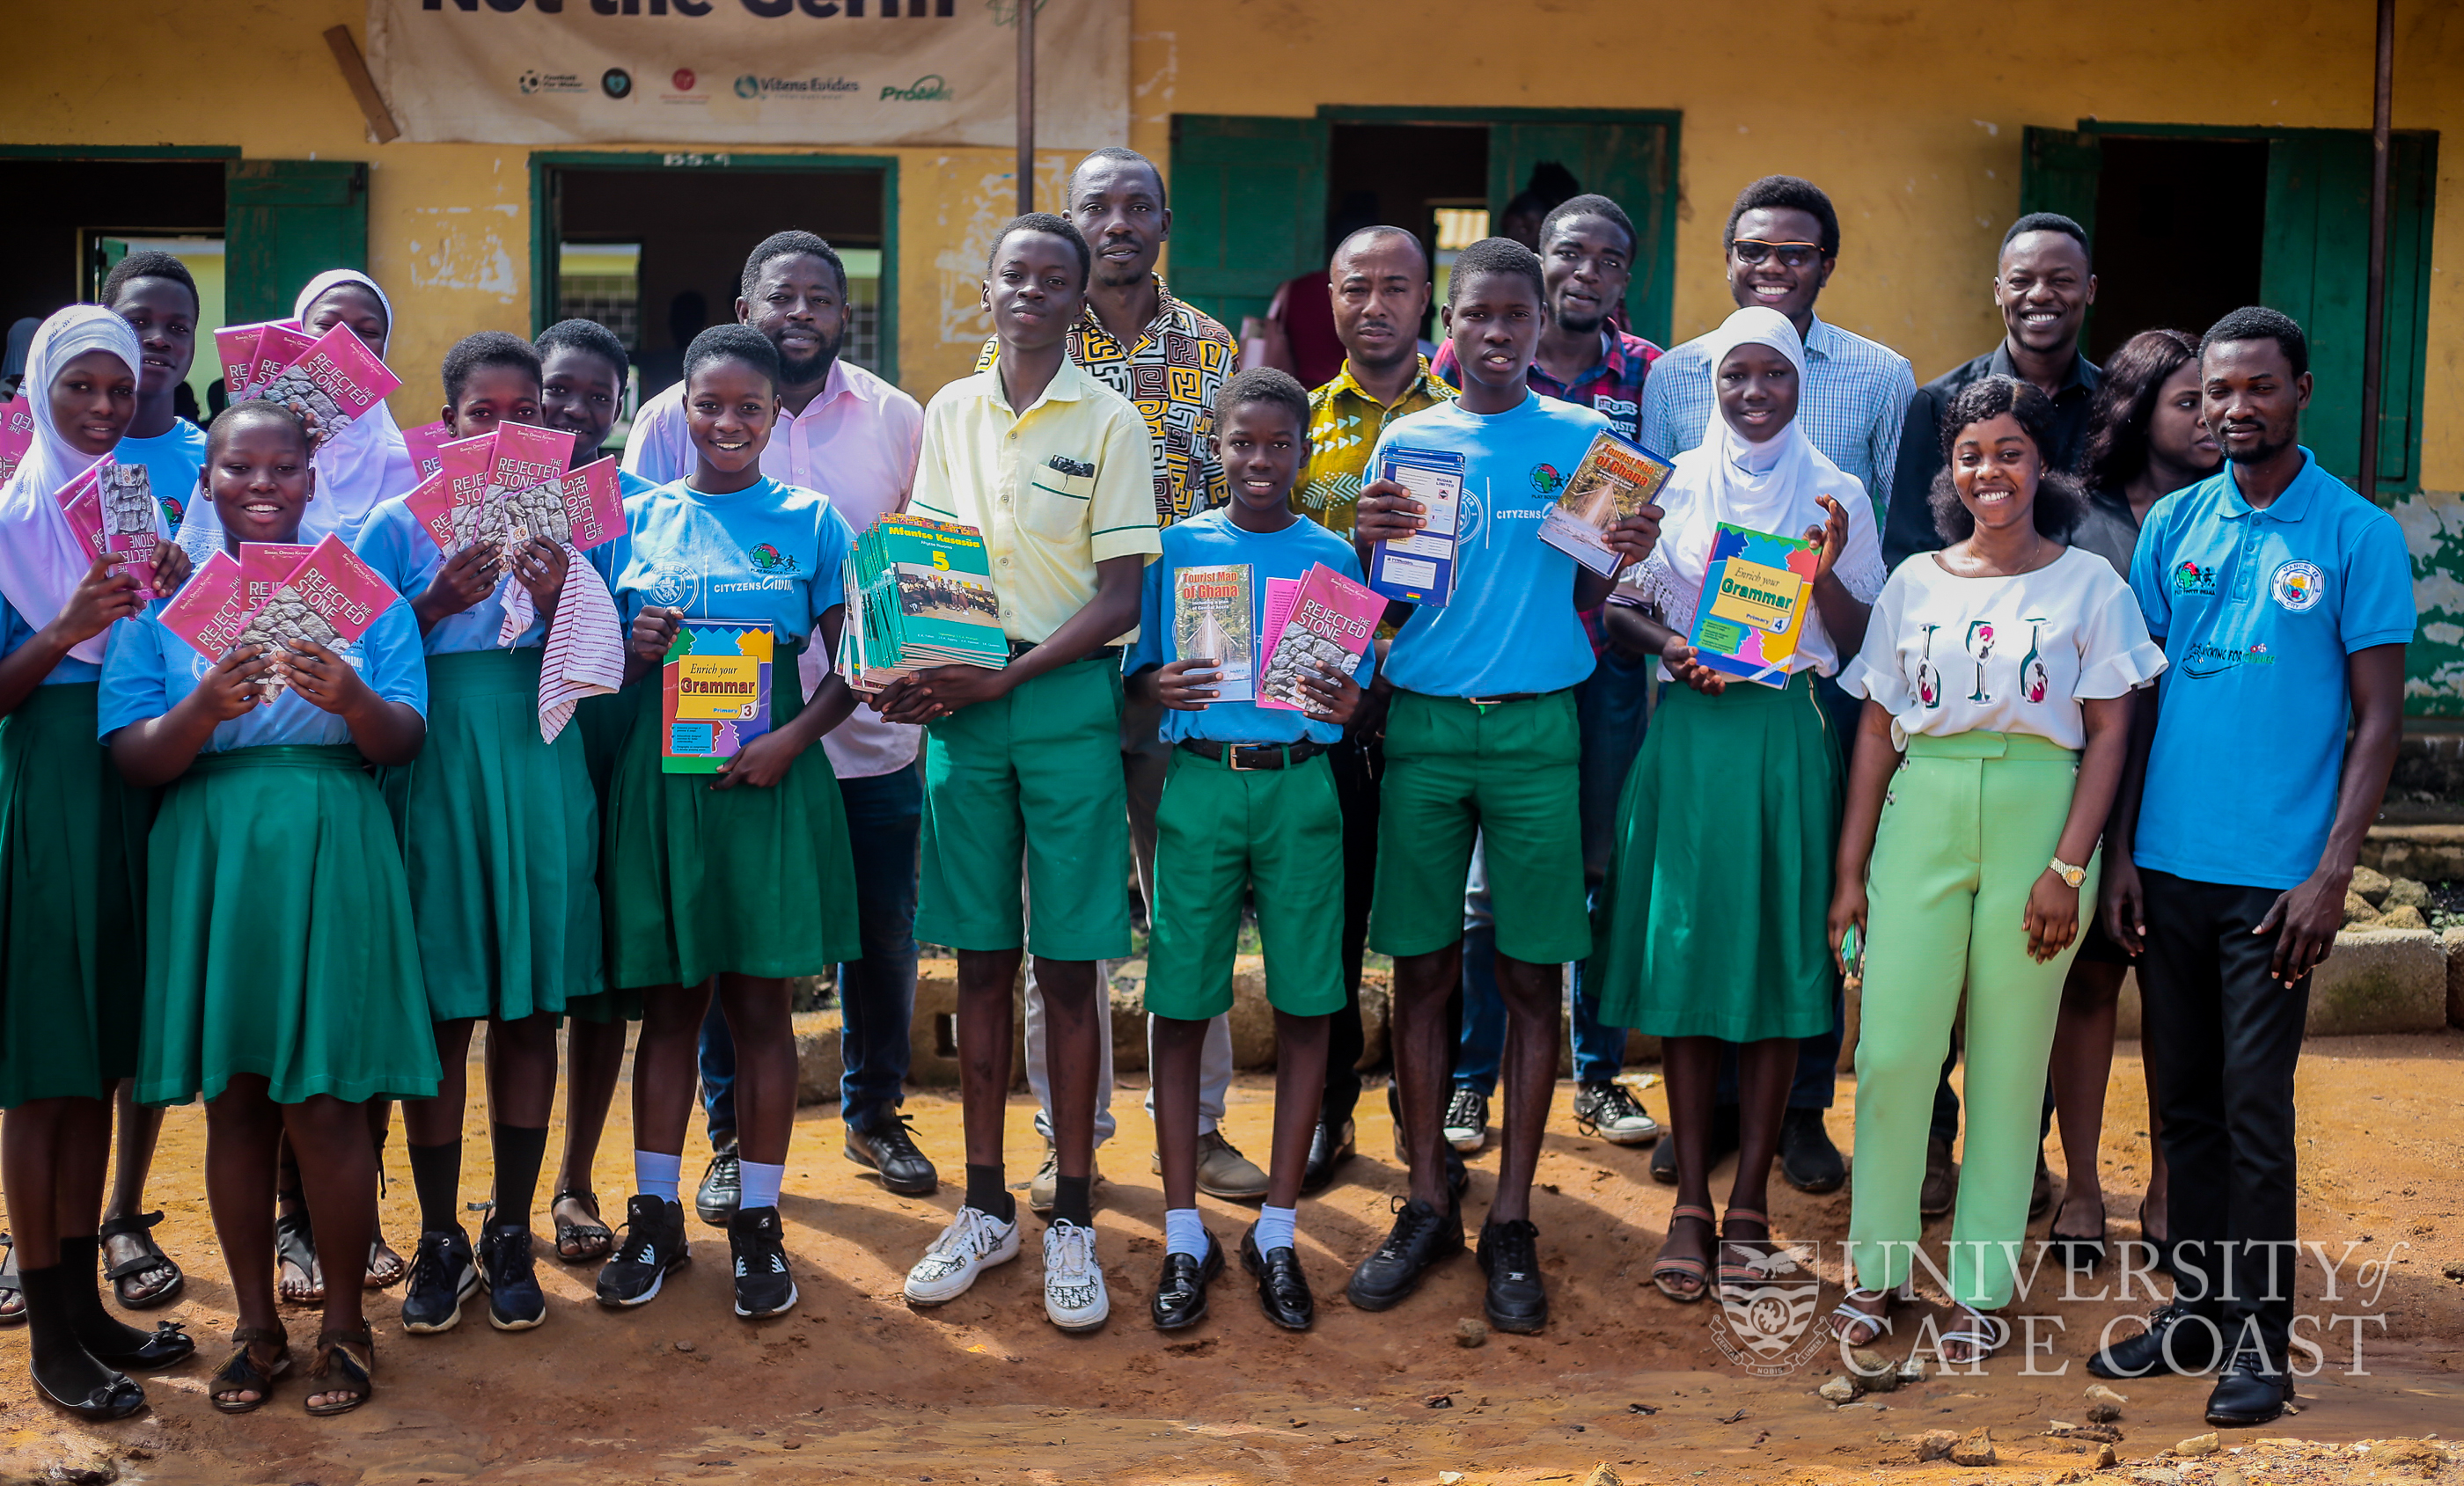 Some pupils of the school with the donated books